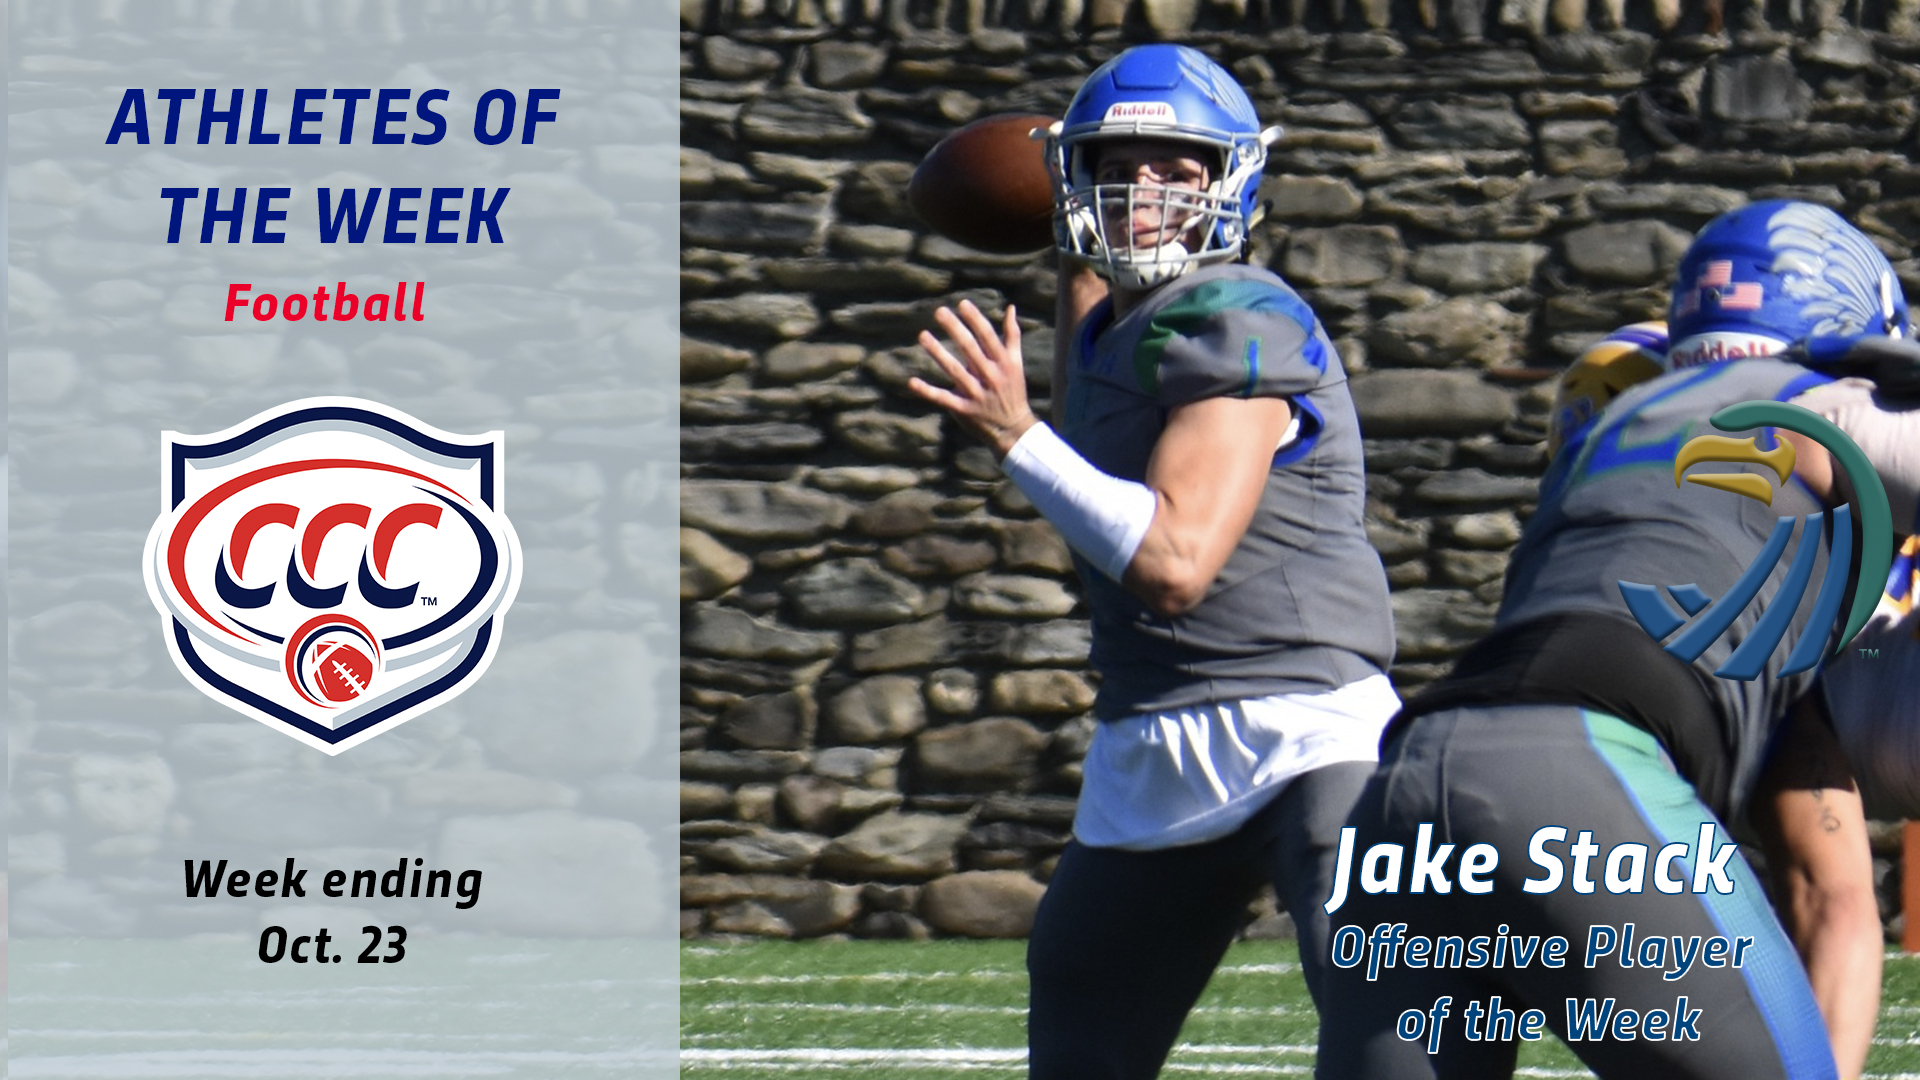 Jake Stack earned CCC Offensive Player of the Week.